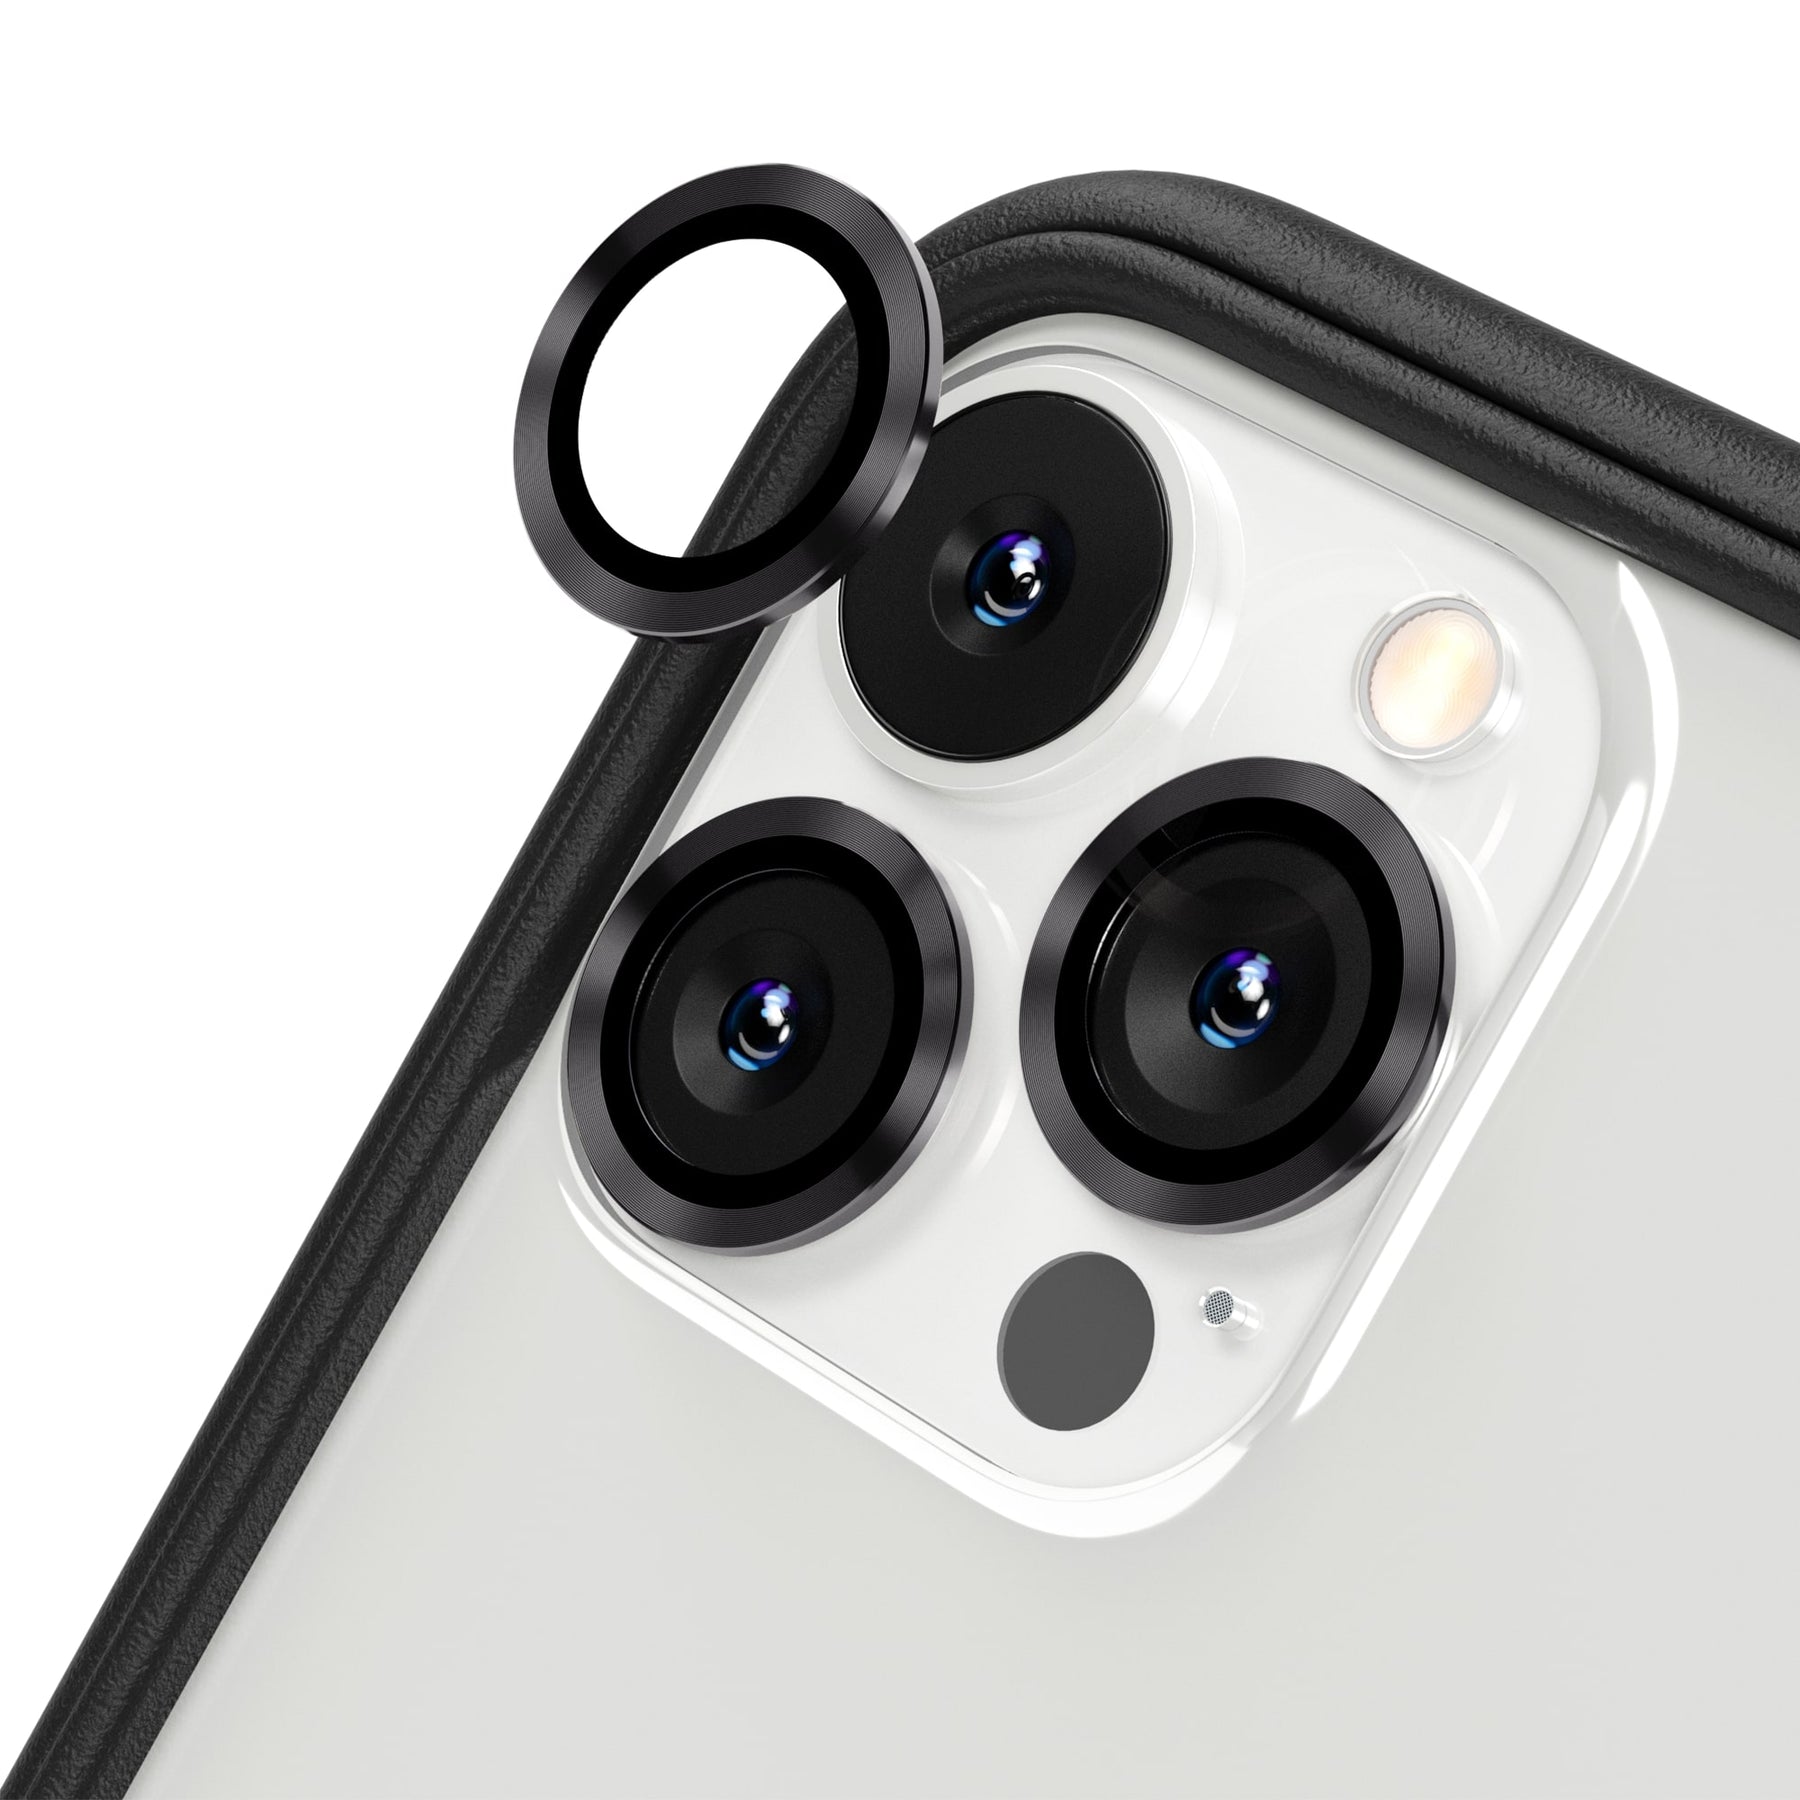 Is Iphone Camera Lens Scratch Proof ?